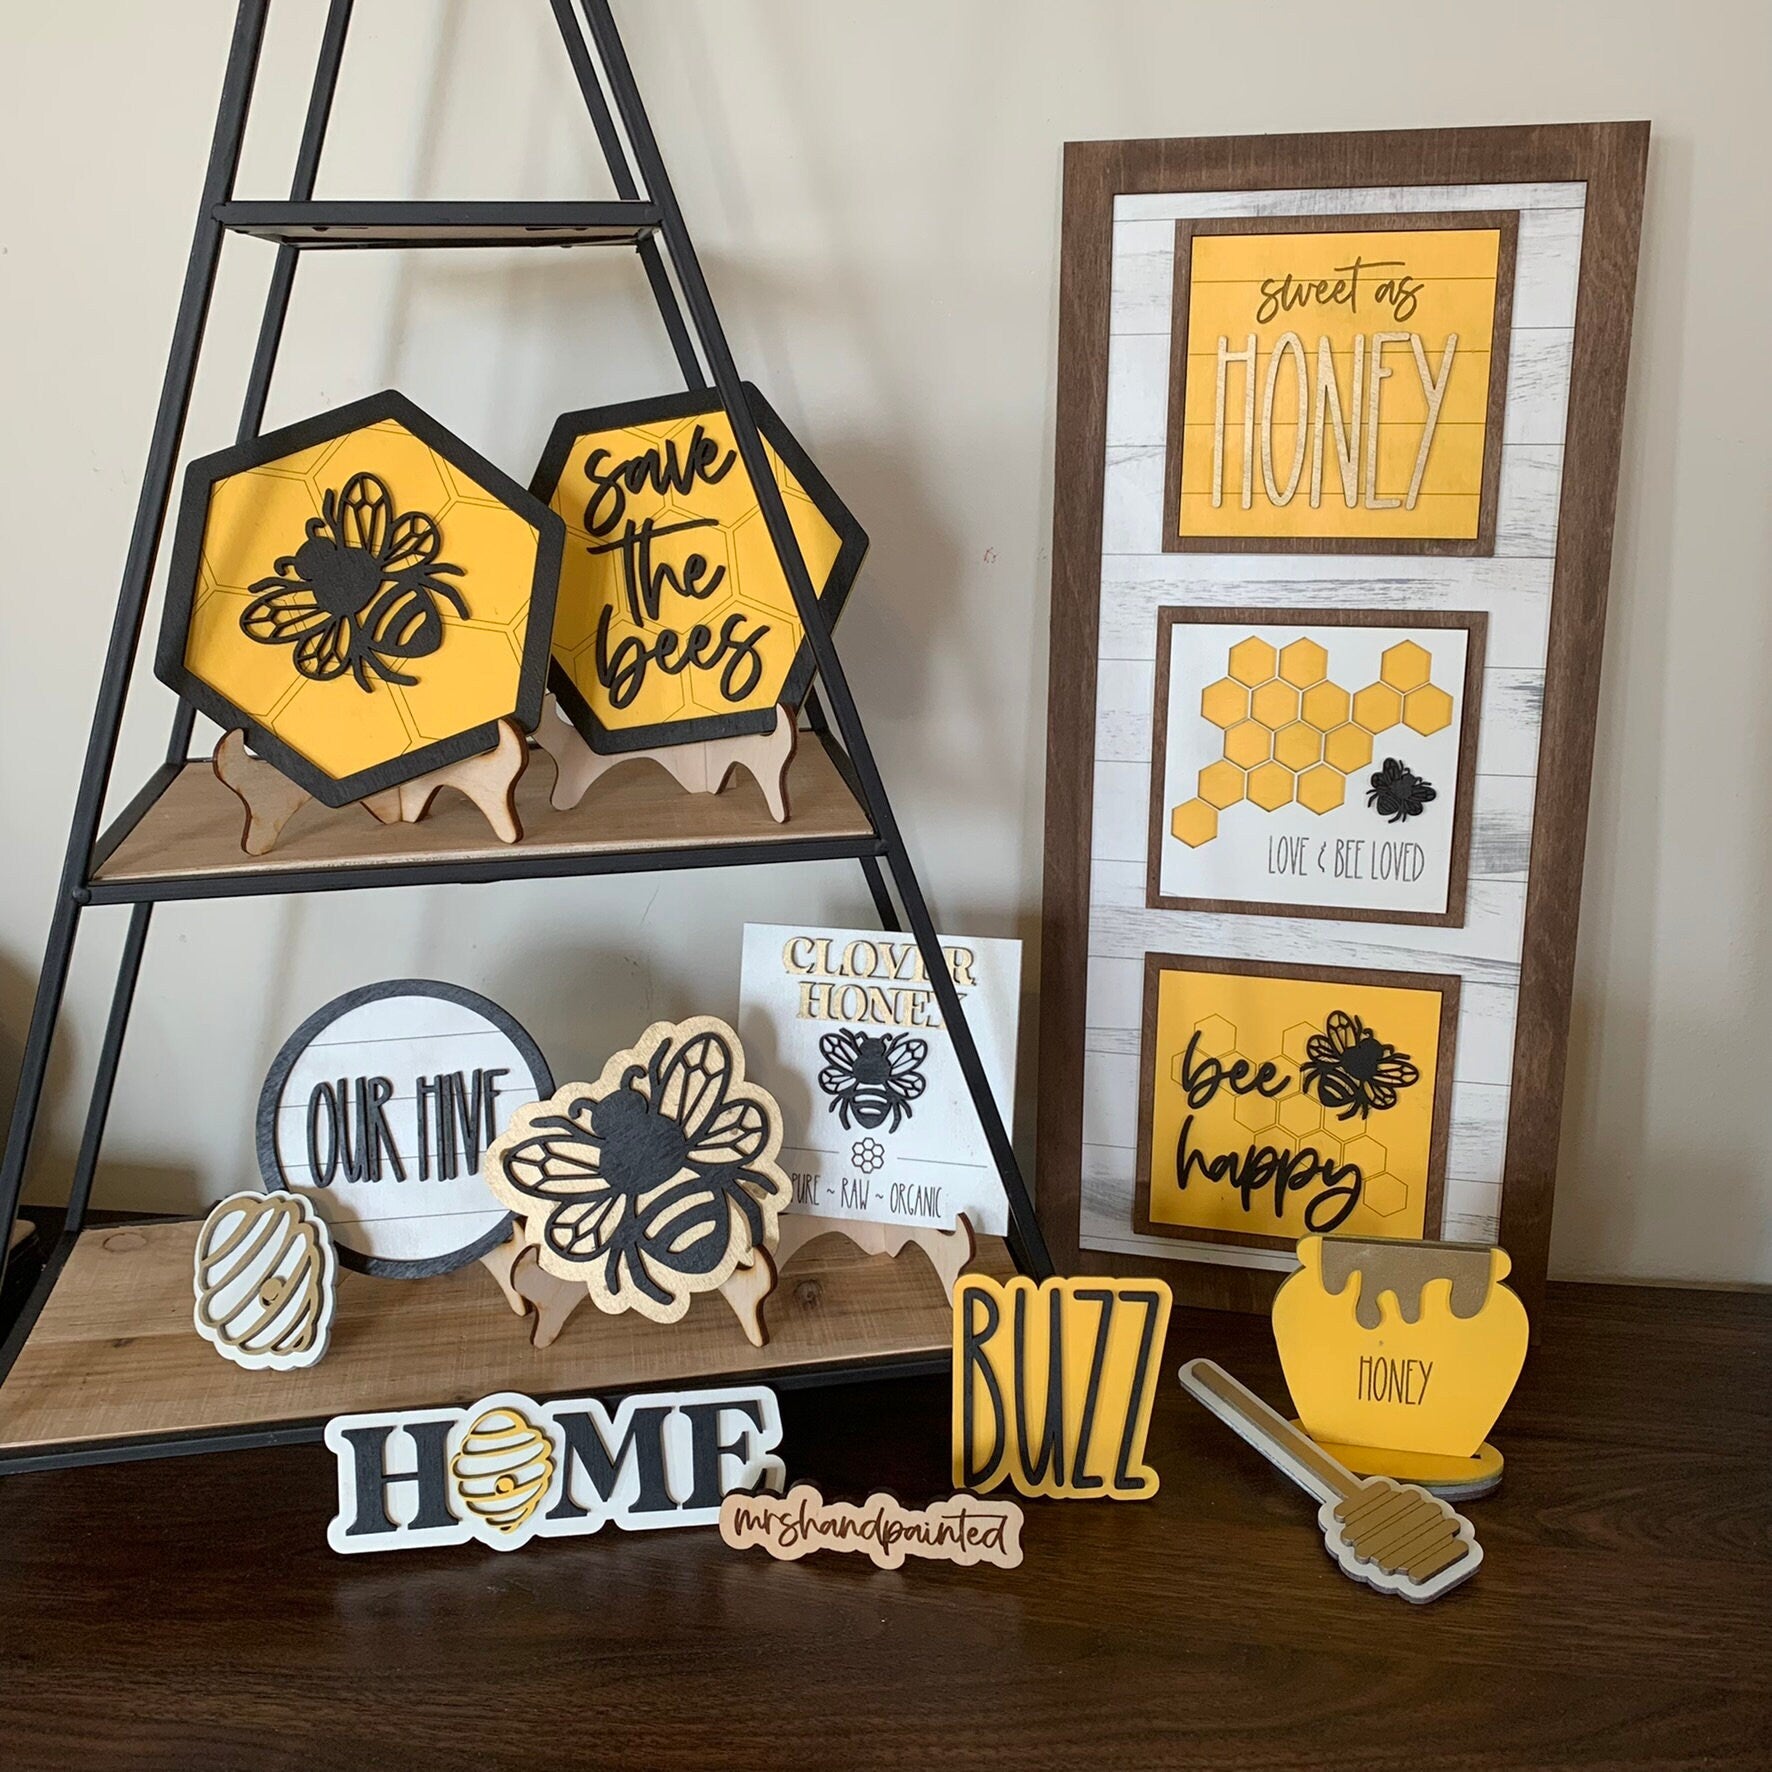 Honey Bees Tiered Tray Decor - Laser Cut Wood Painted